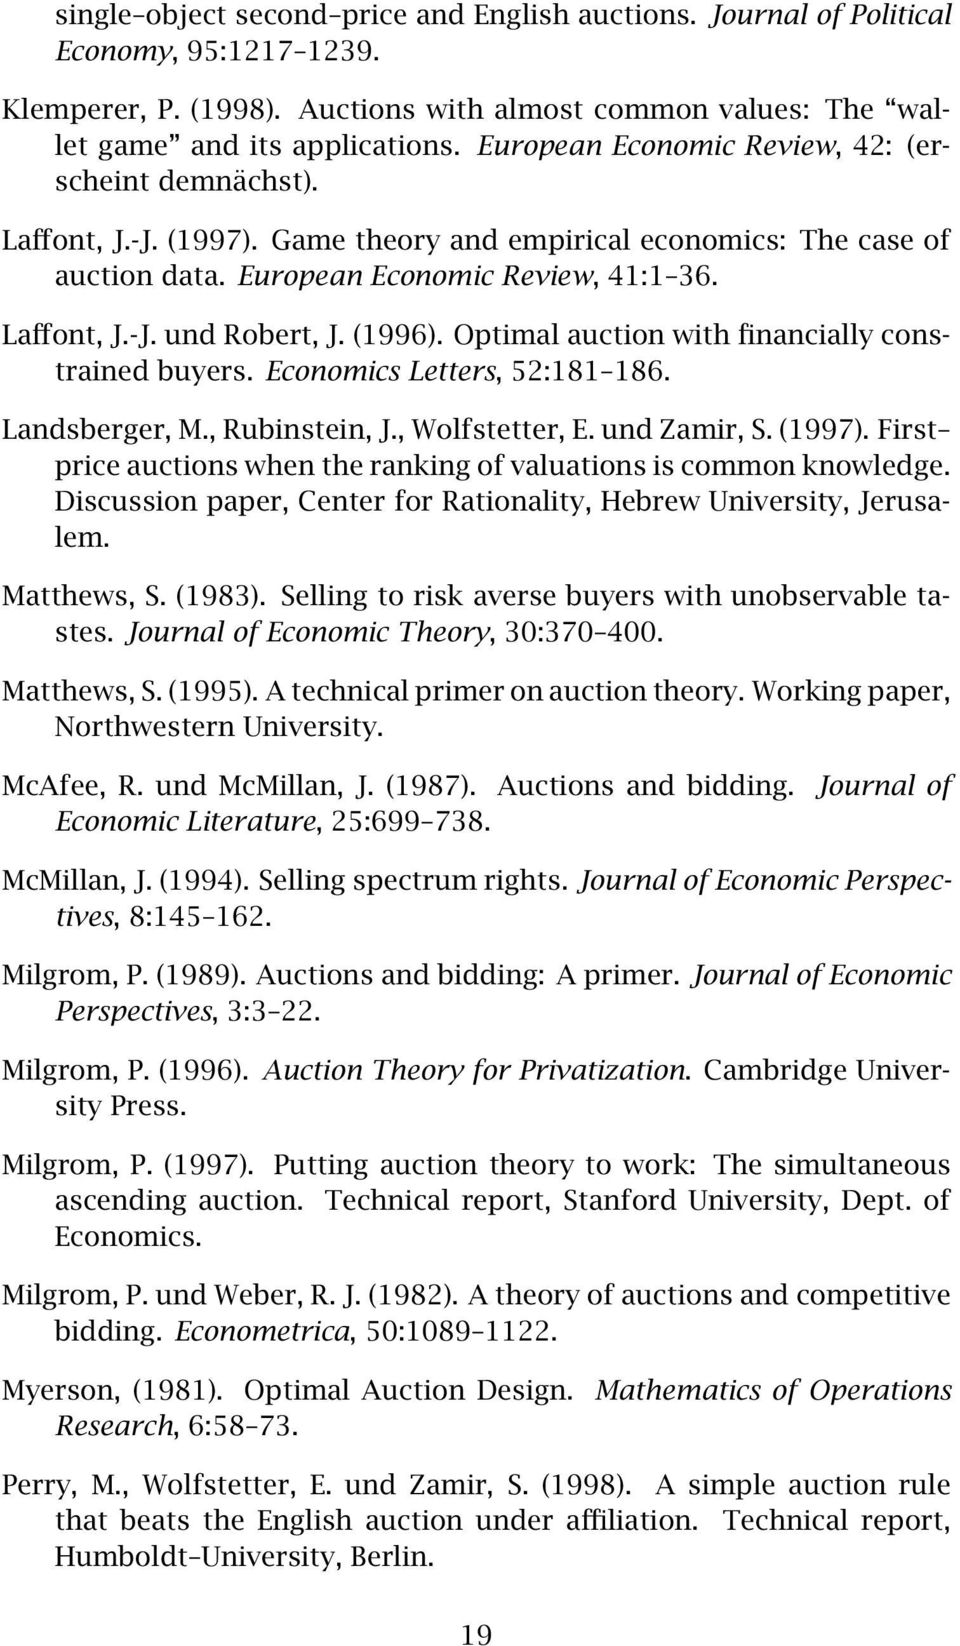 Optimal auction with financially constrained buyers Economics Letters, 52:181 186 Landsberger, M, Rubinstein, J, Wolfstetter, E und Zamir, S (1997) First price auctions when the ranking of valuations